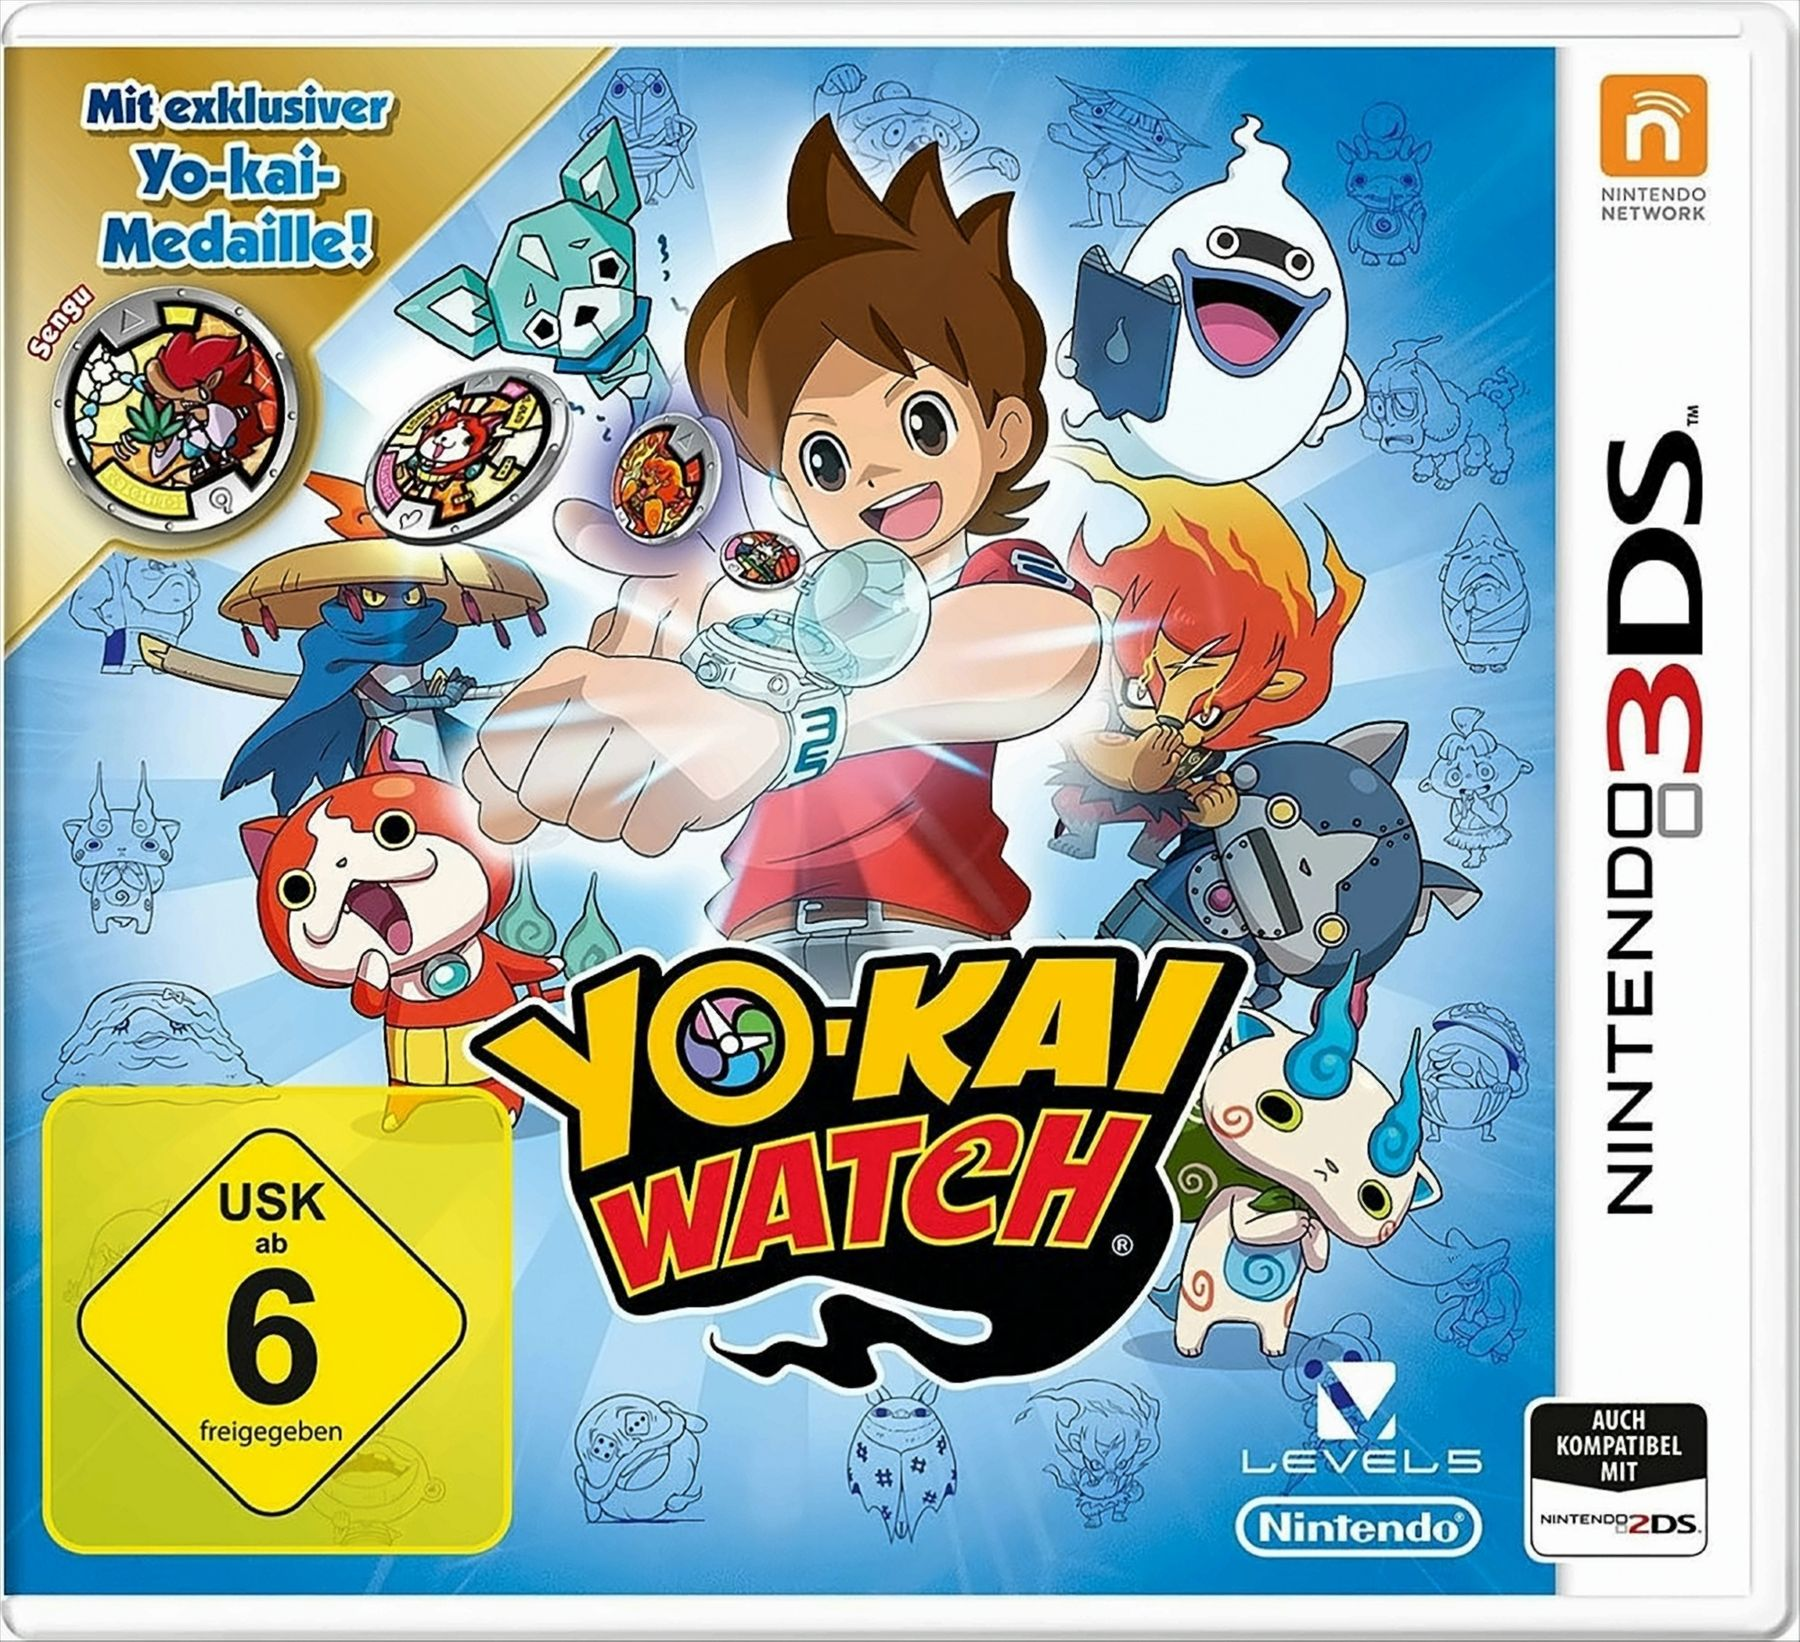 Yo-Kai Watch Special Edition inkl. [Nintendo 3DS] - Medaille